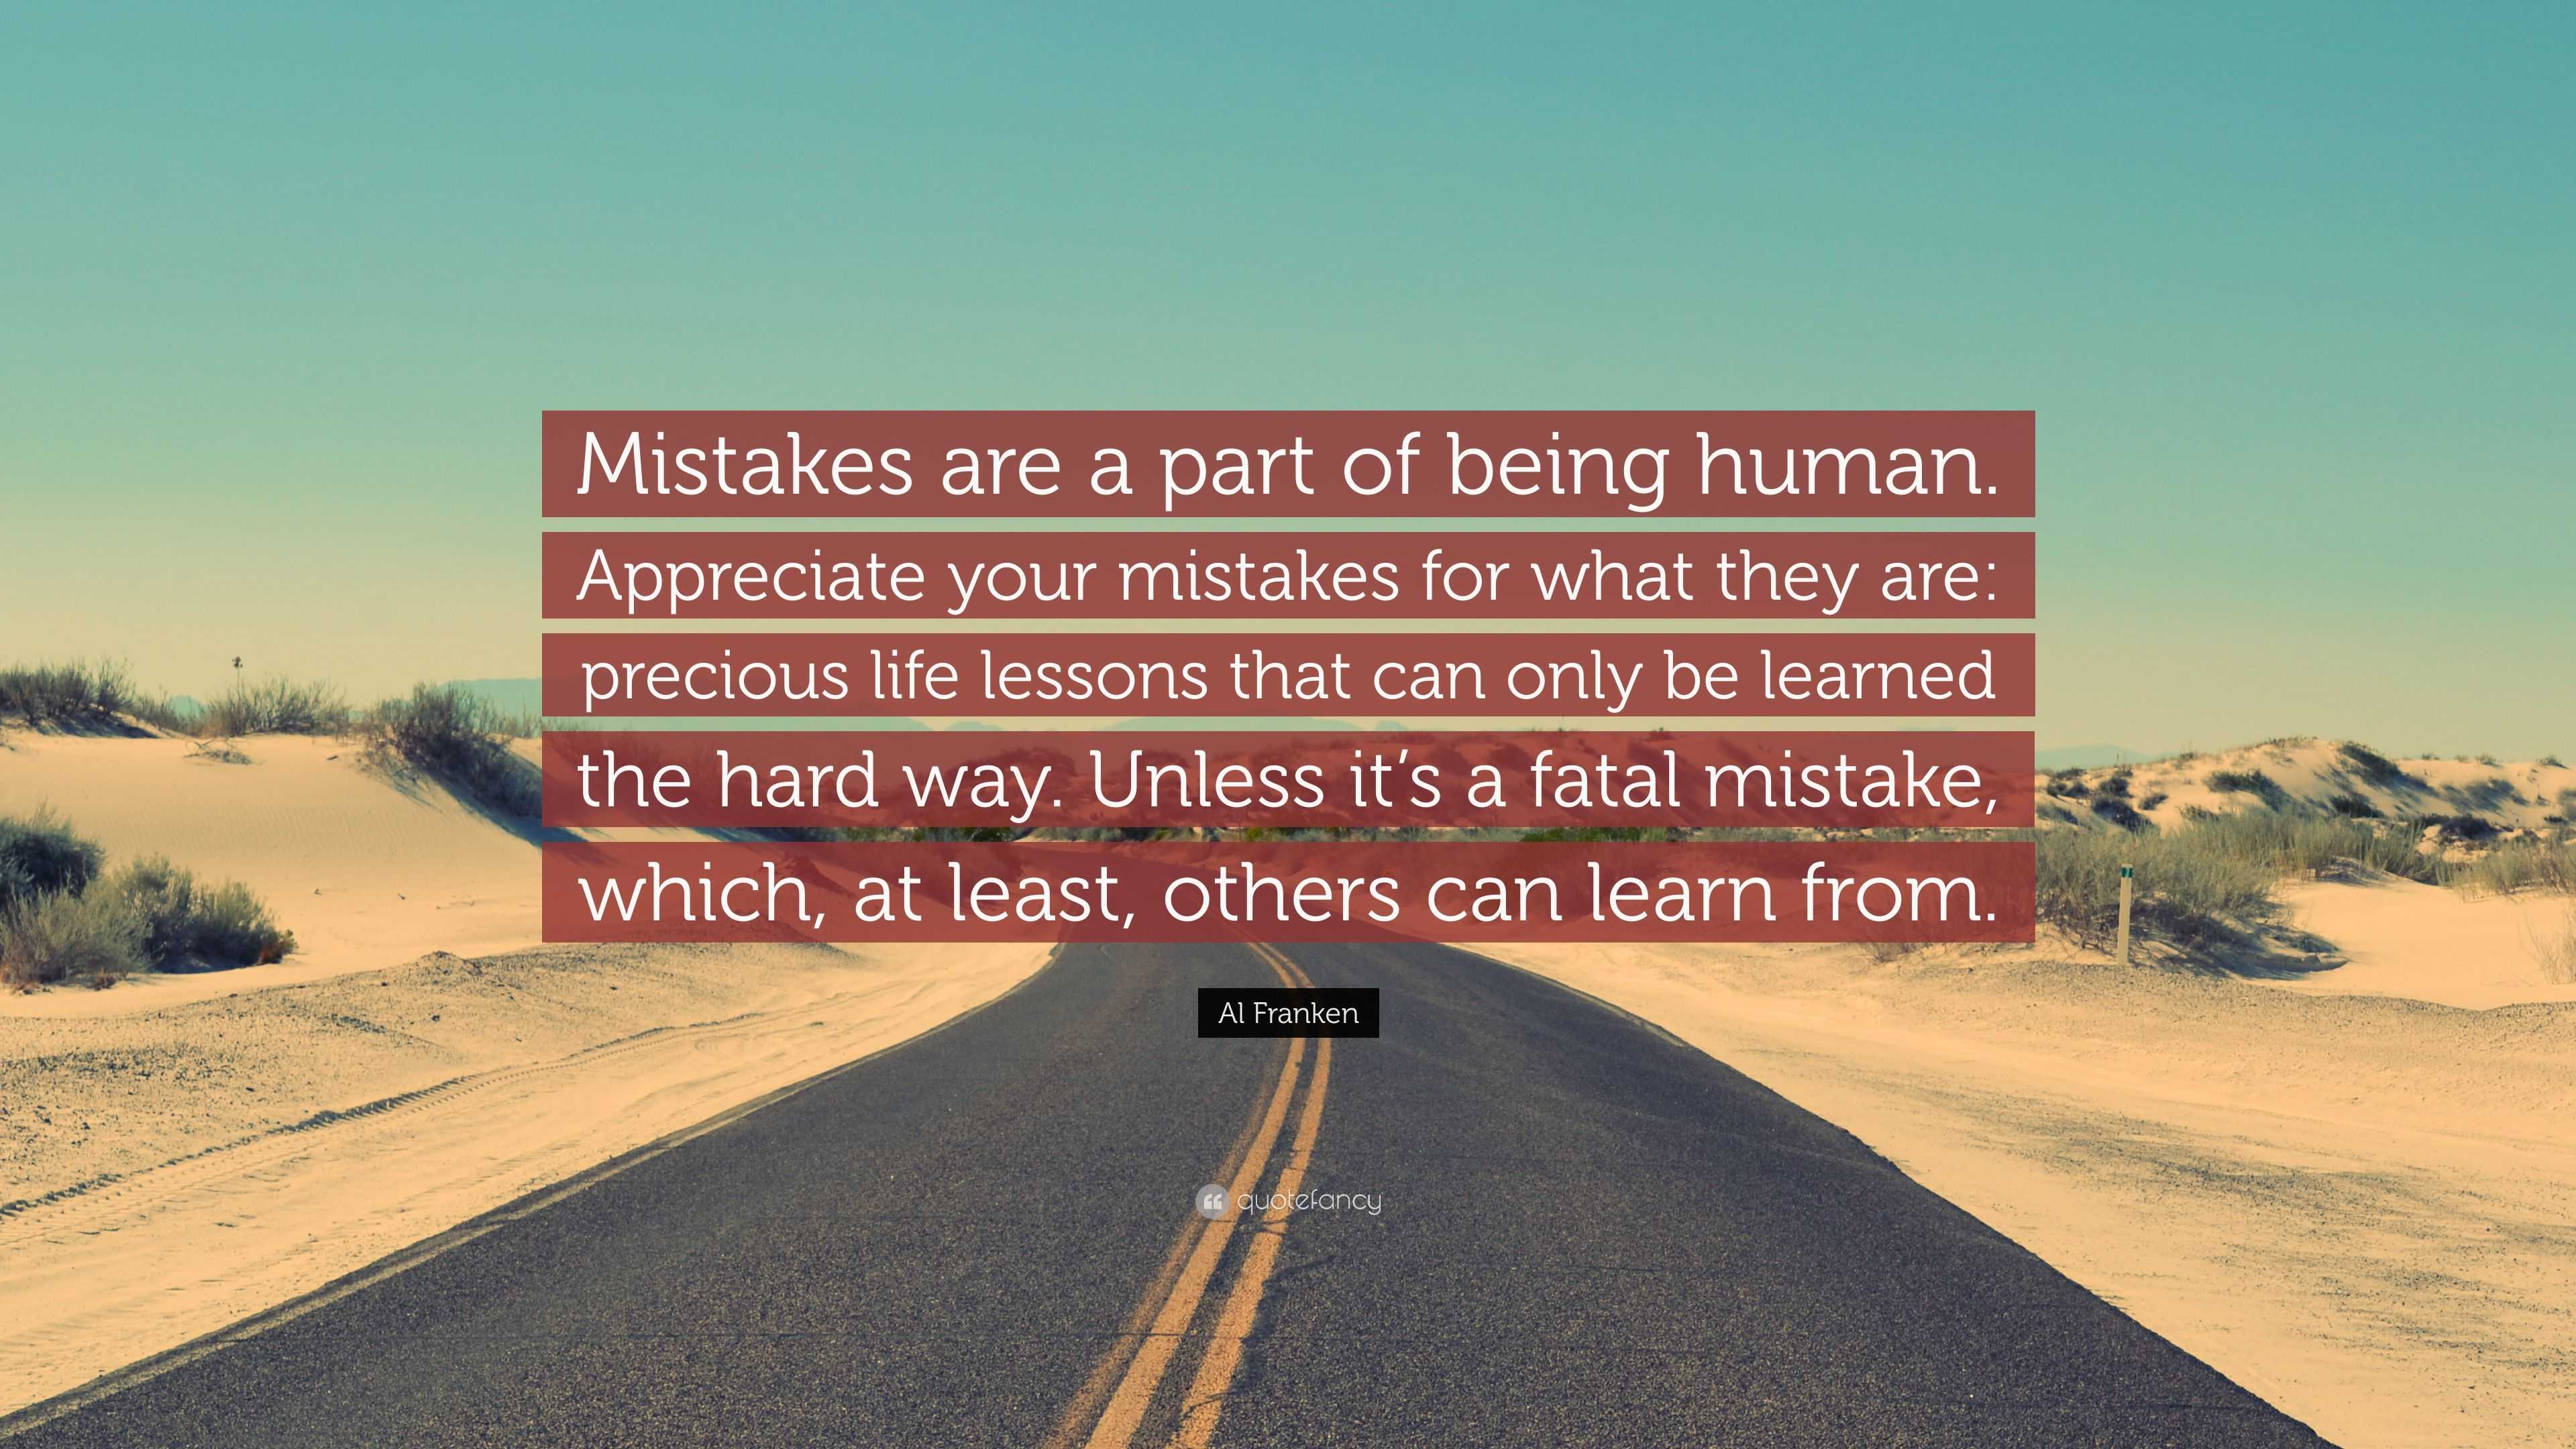 Mistakes are a part of being human. Appreciate your